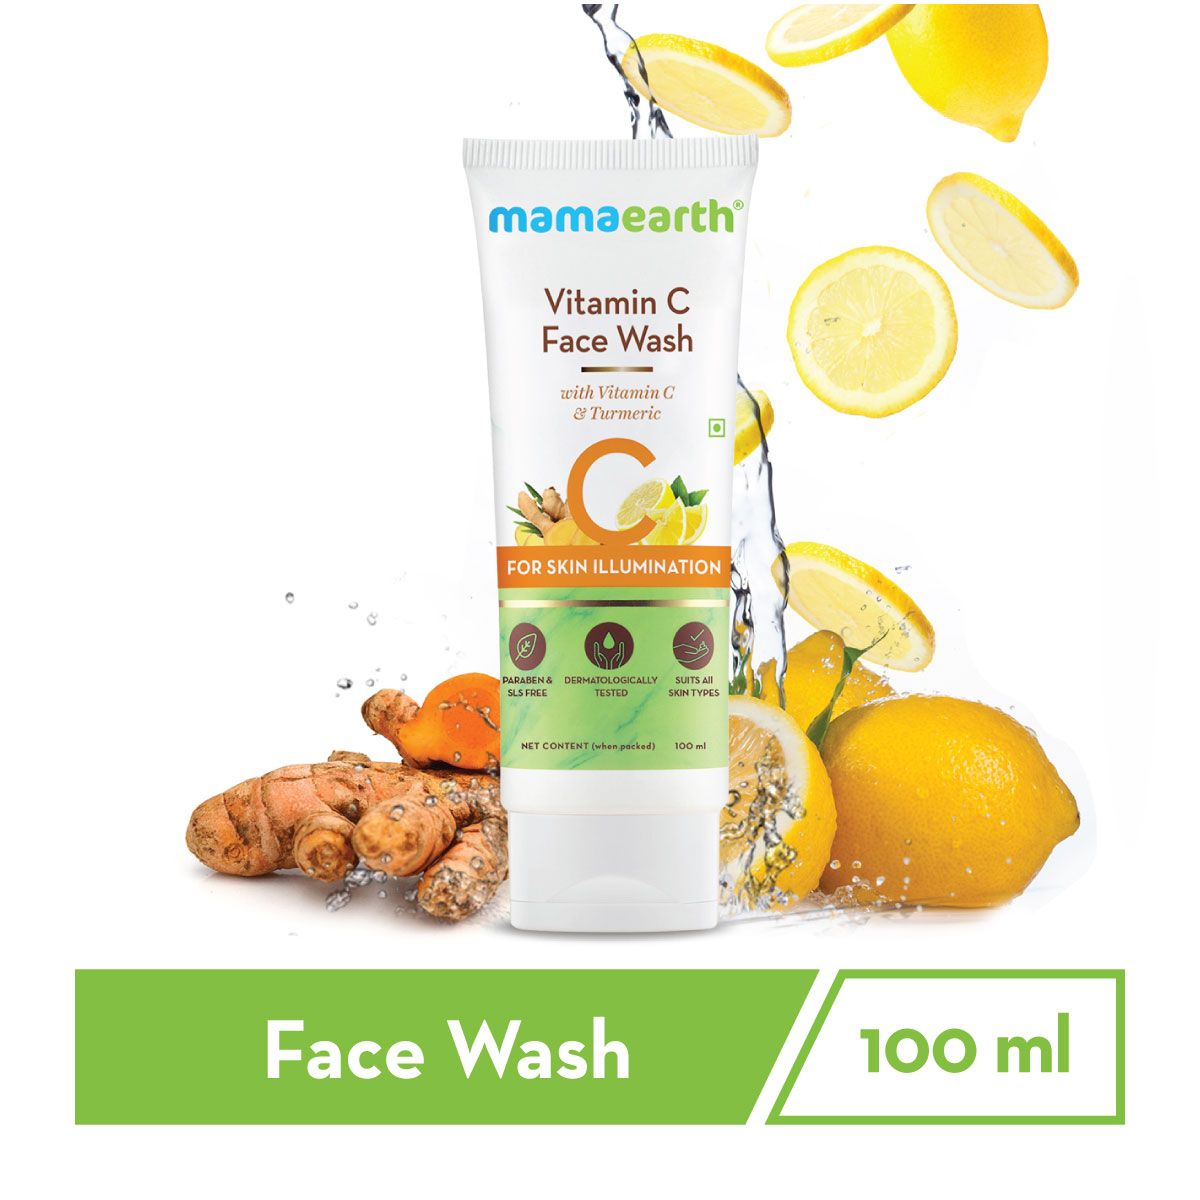 Mamaearth Vitamin C Face Wash Better Than Others Available In The Market